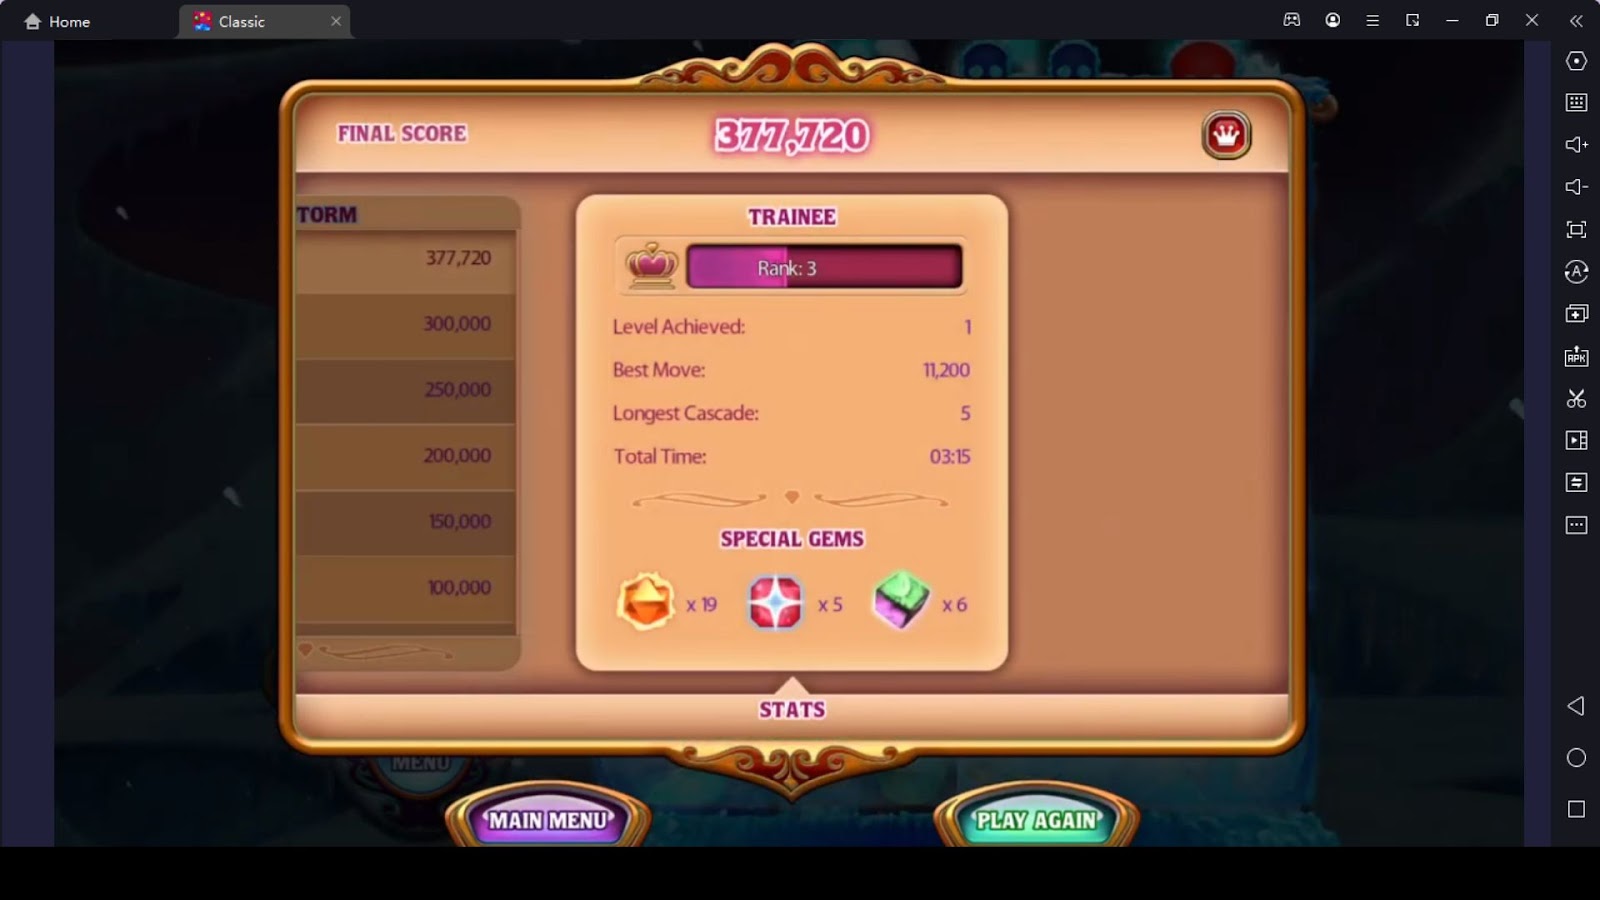 Special Types of Gems in Bejeweled Classic